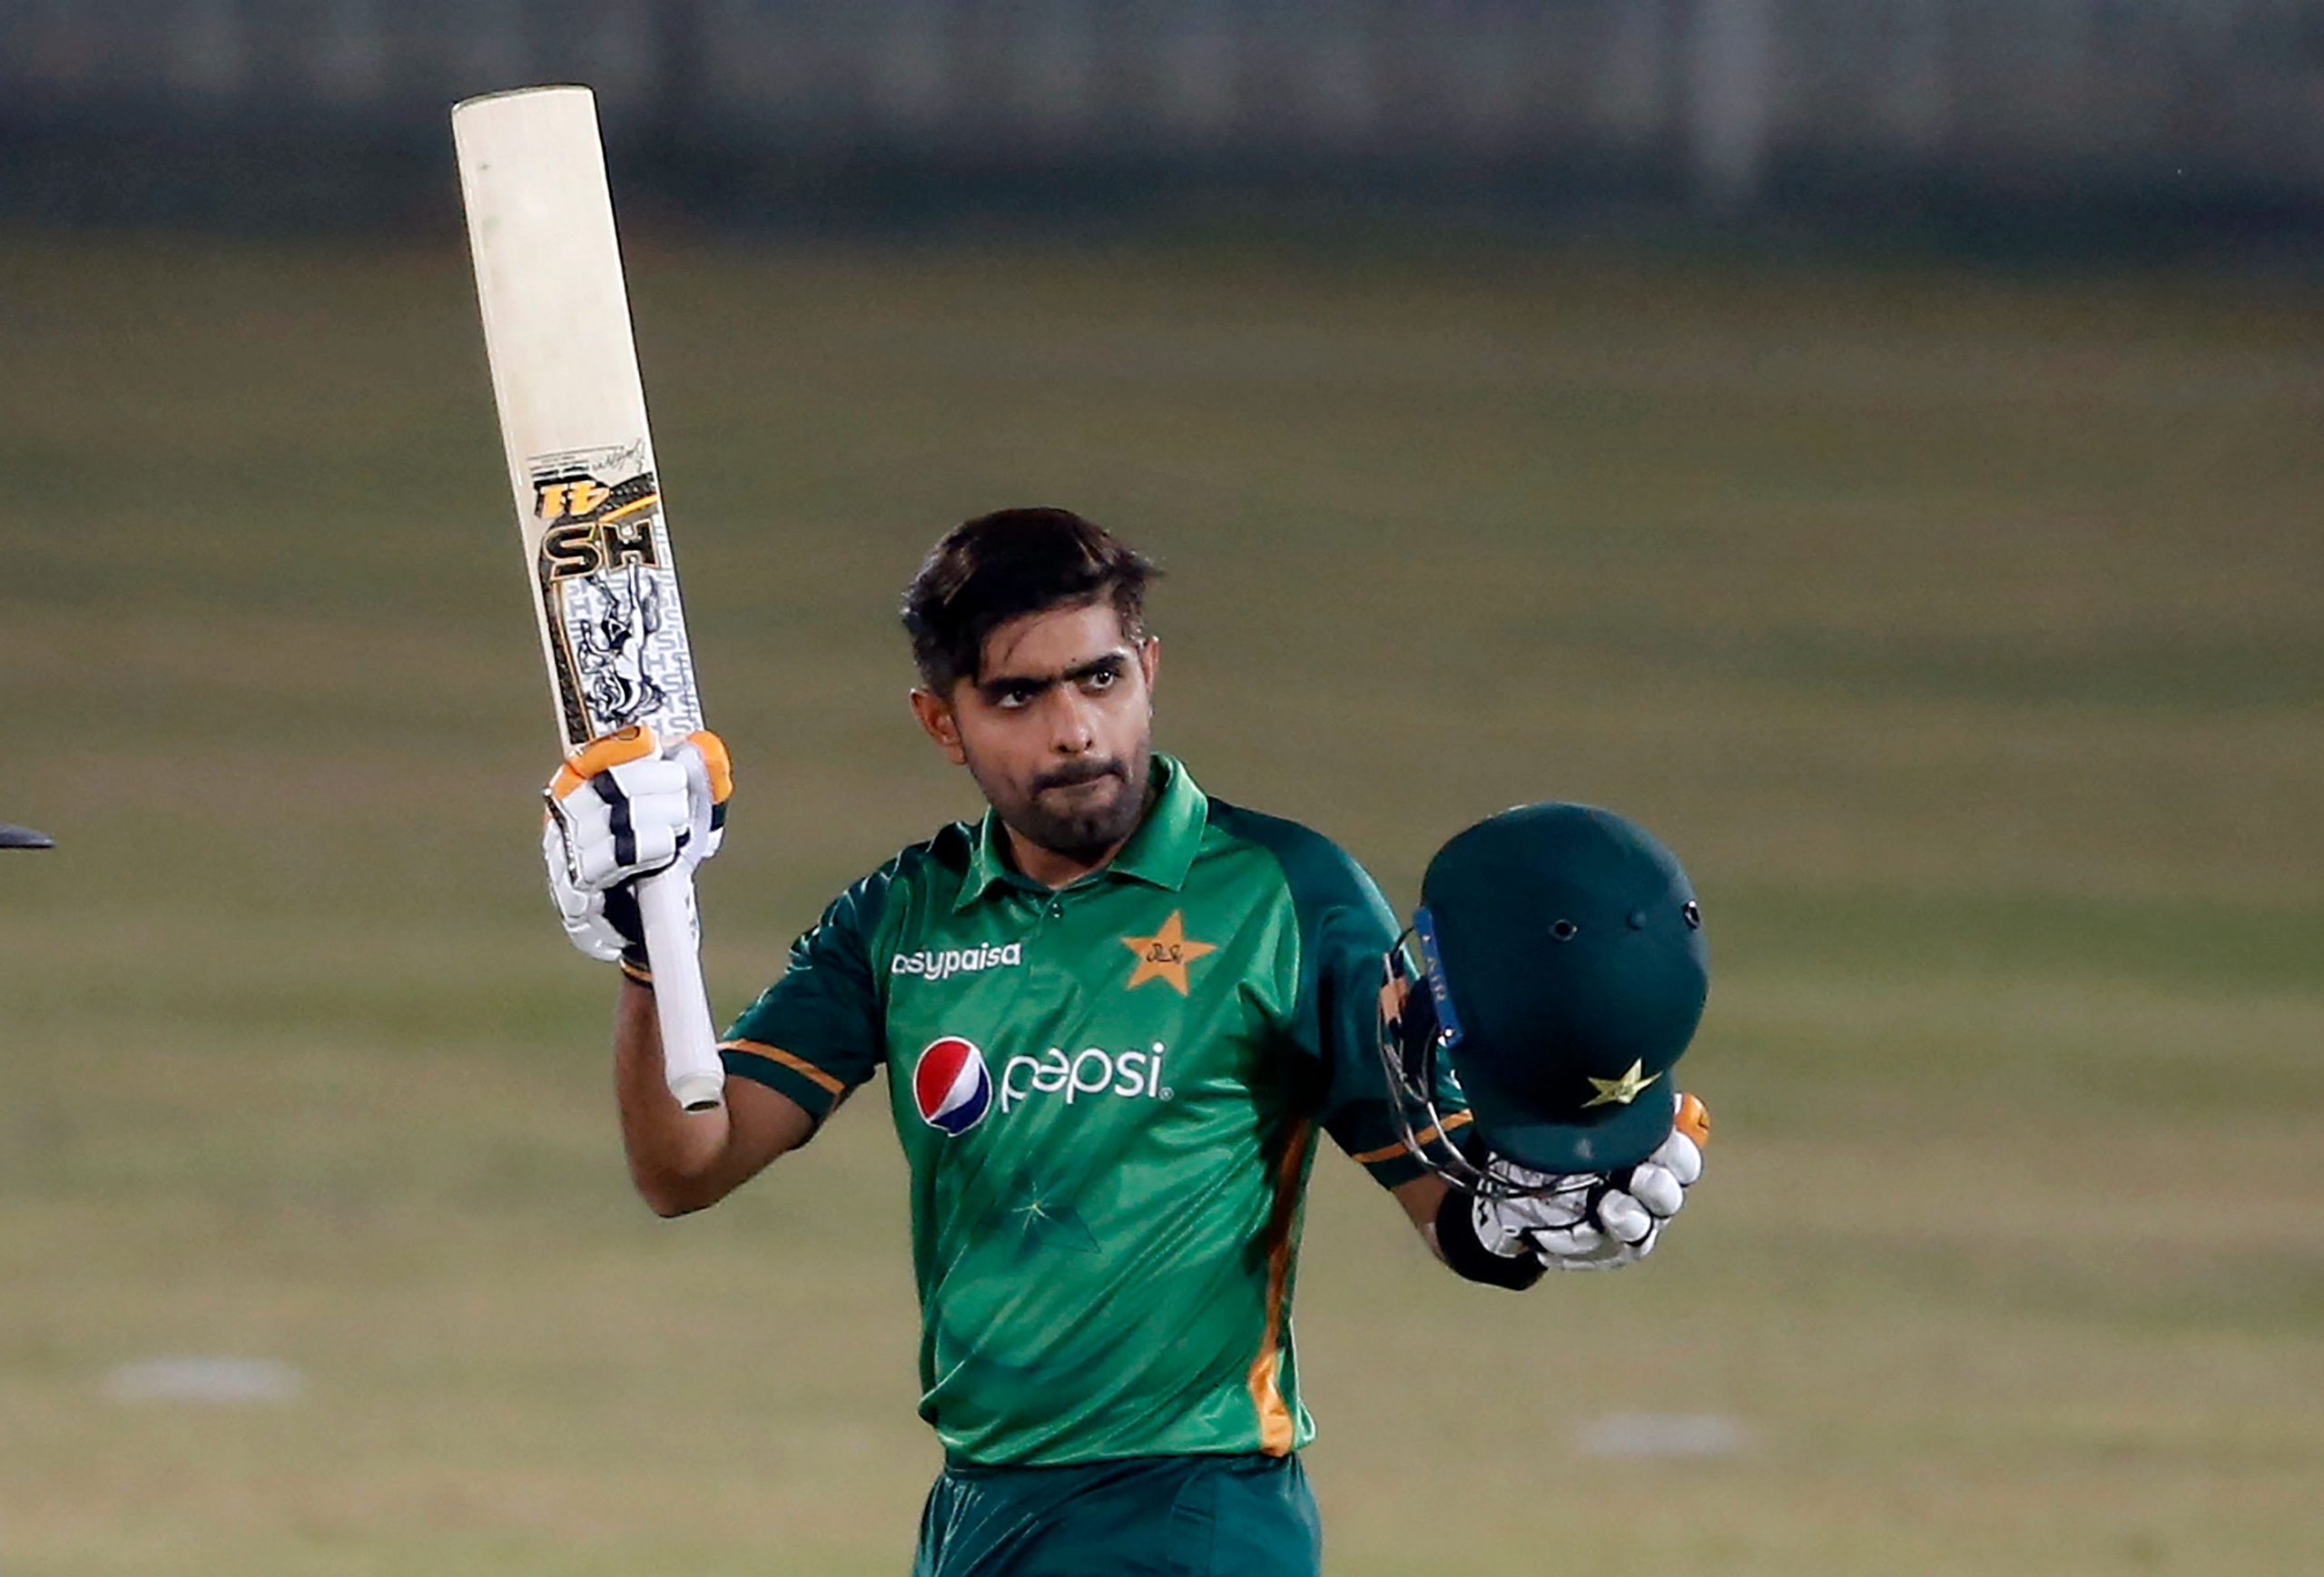 Pakistan captain Babar Azam ruled out of second Test against New Zealand